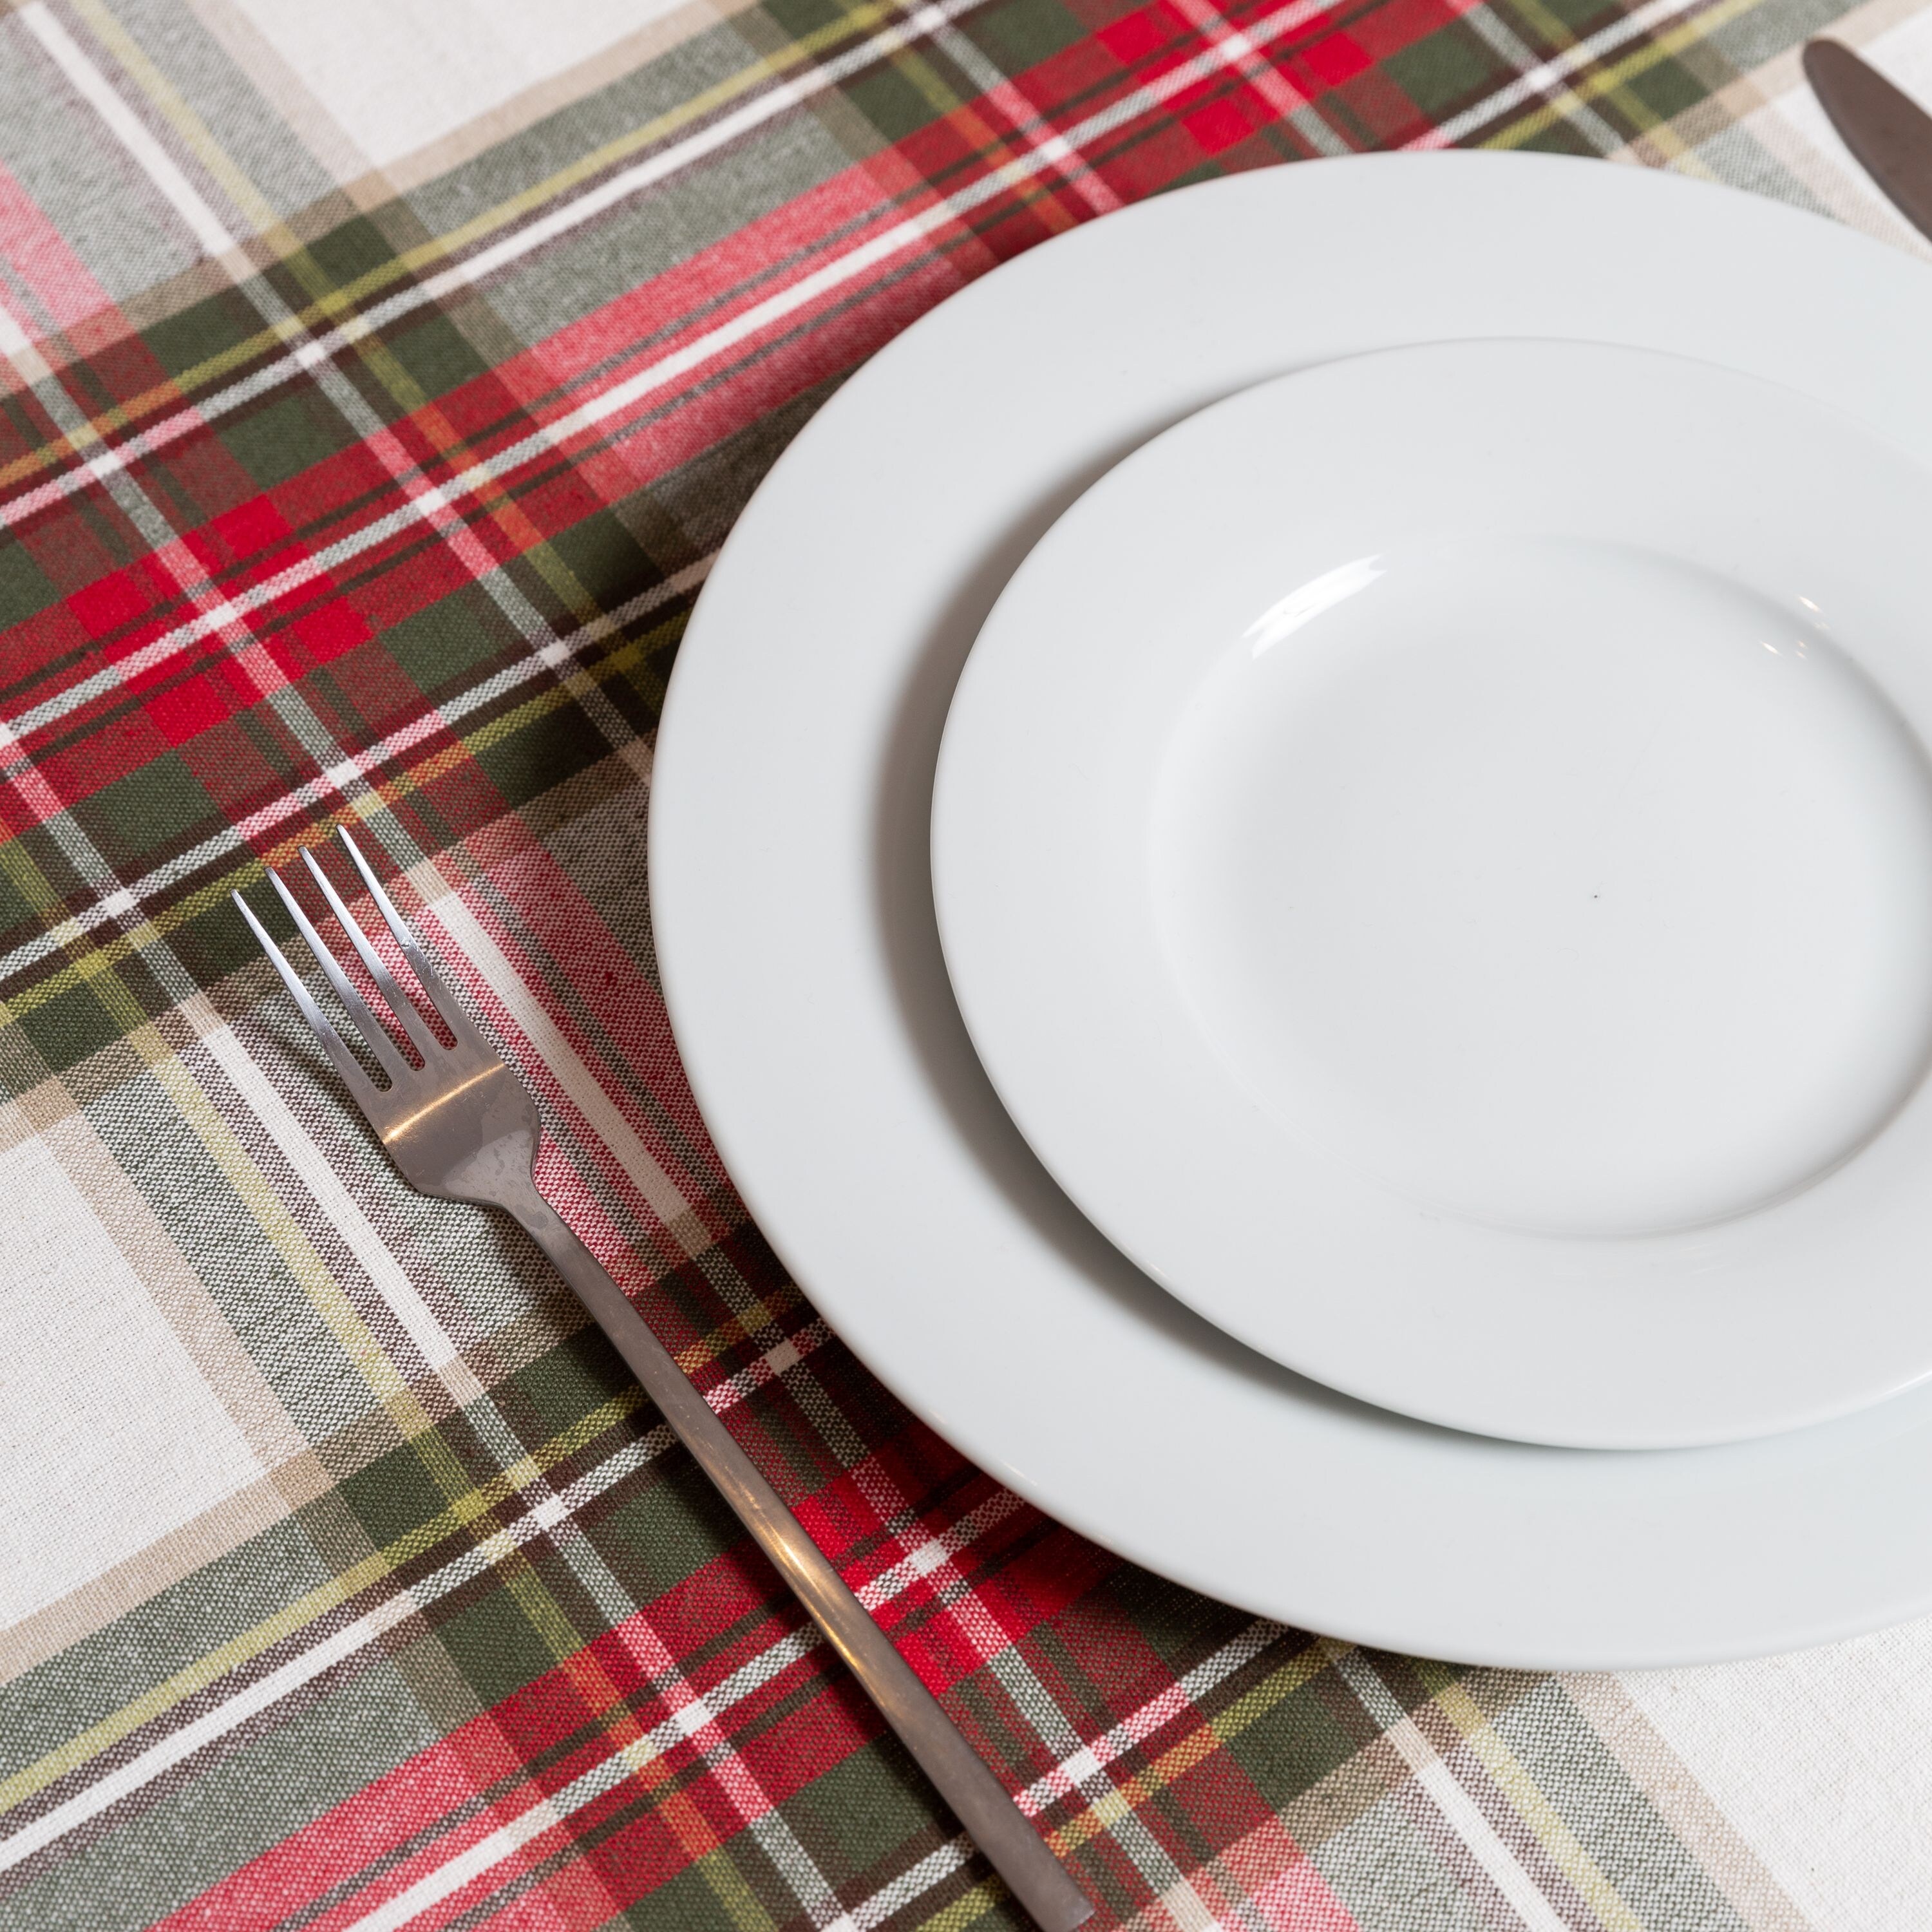 https://ak1.ostkcdn.com/images/products/is/images/direct/d2f9b21863c6f3117af62b5aa99c94995f3f8269/Fabstyles-Celebration-Plaid-Cotton-Tablecloth.jpg